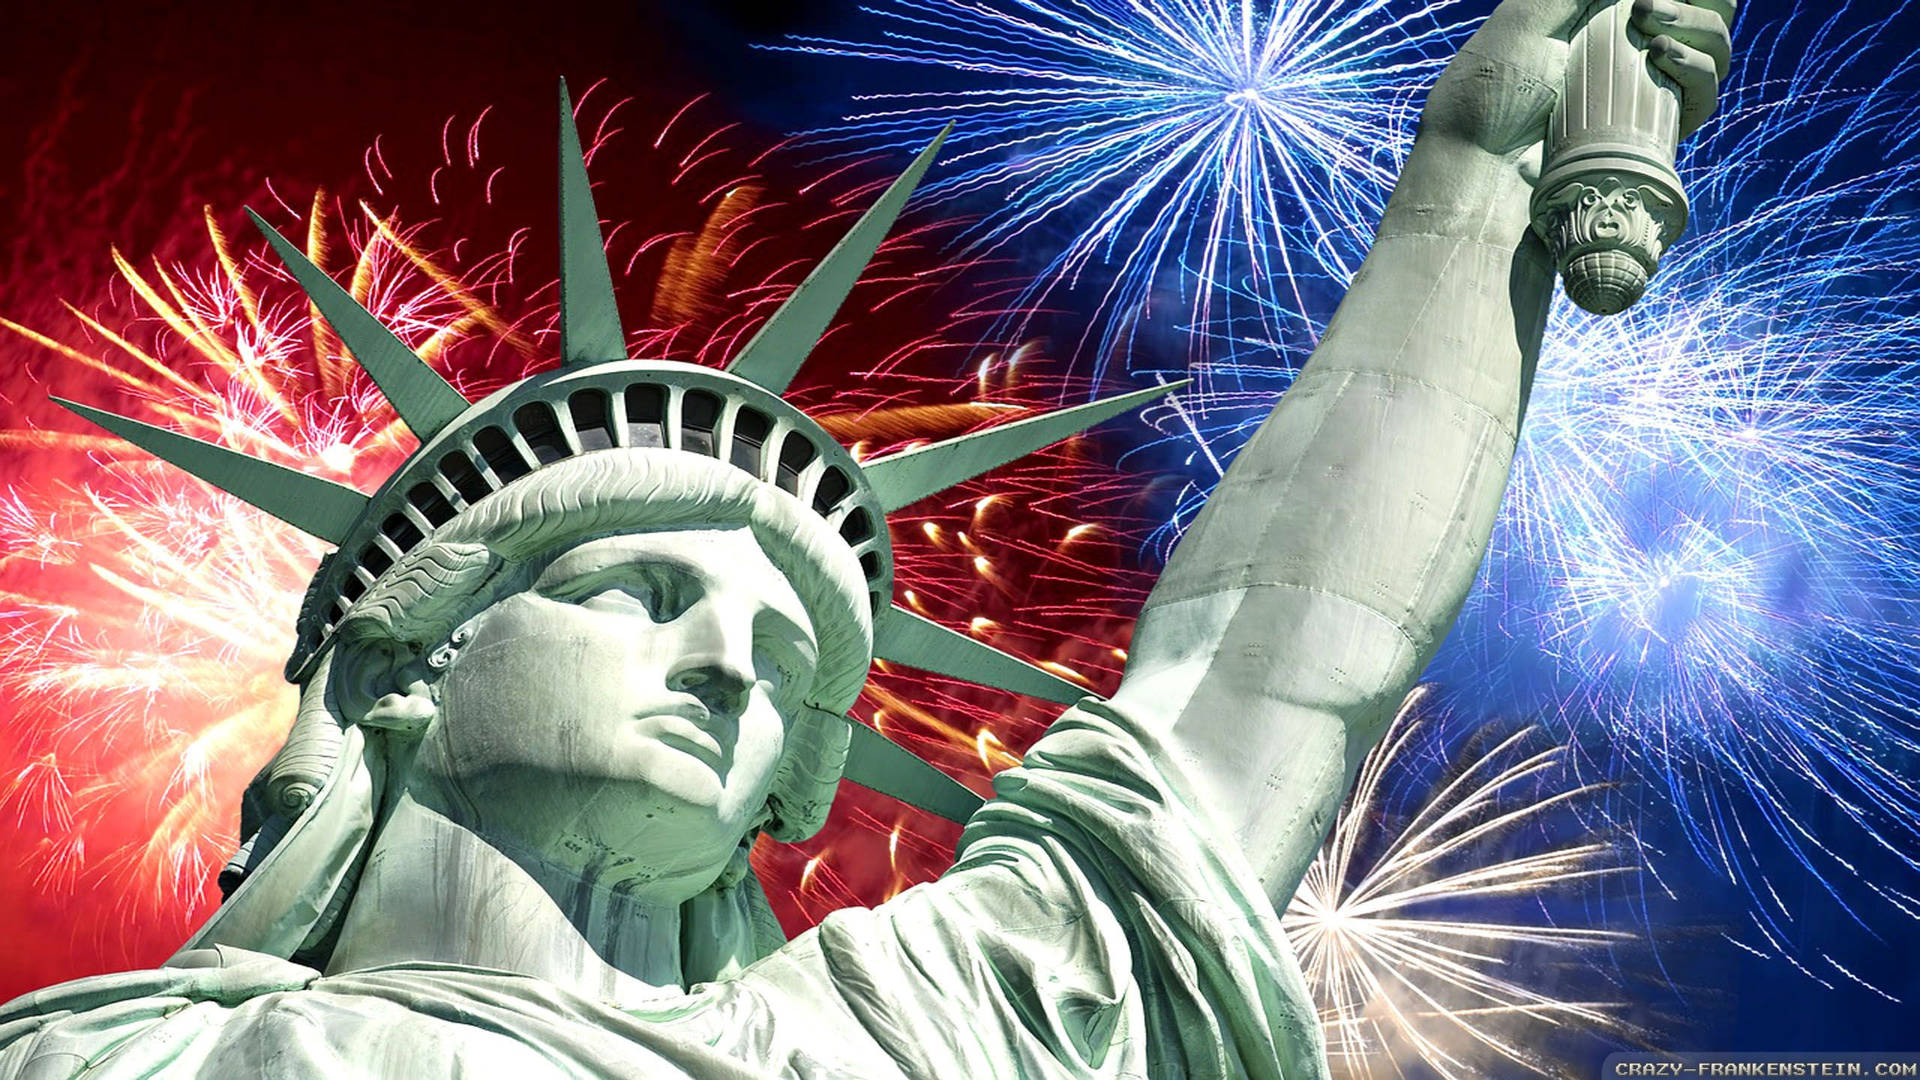 The Statue Of Liberty Is Shown With Fireworks In The Background Background